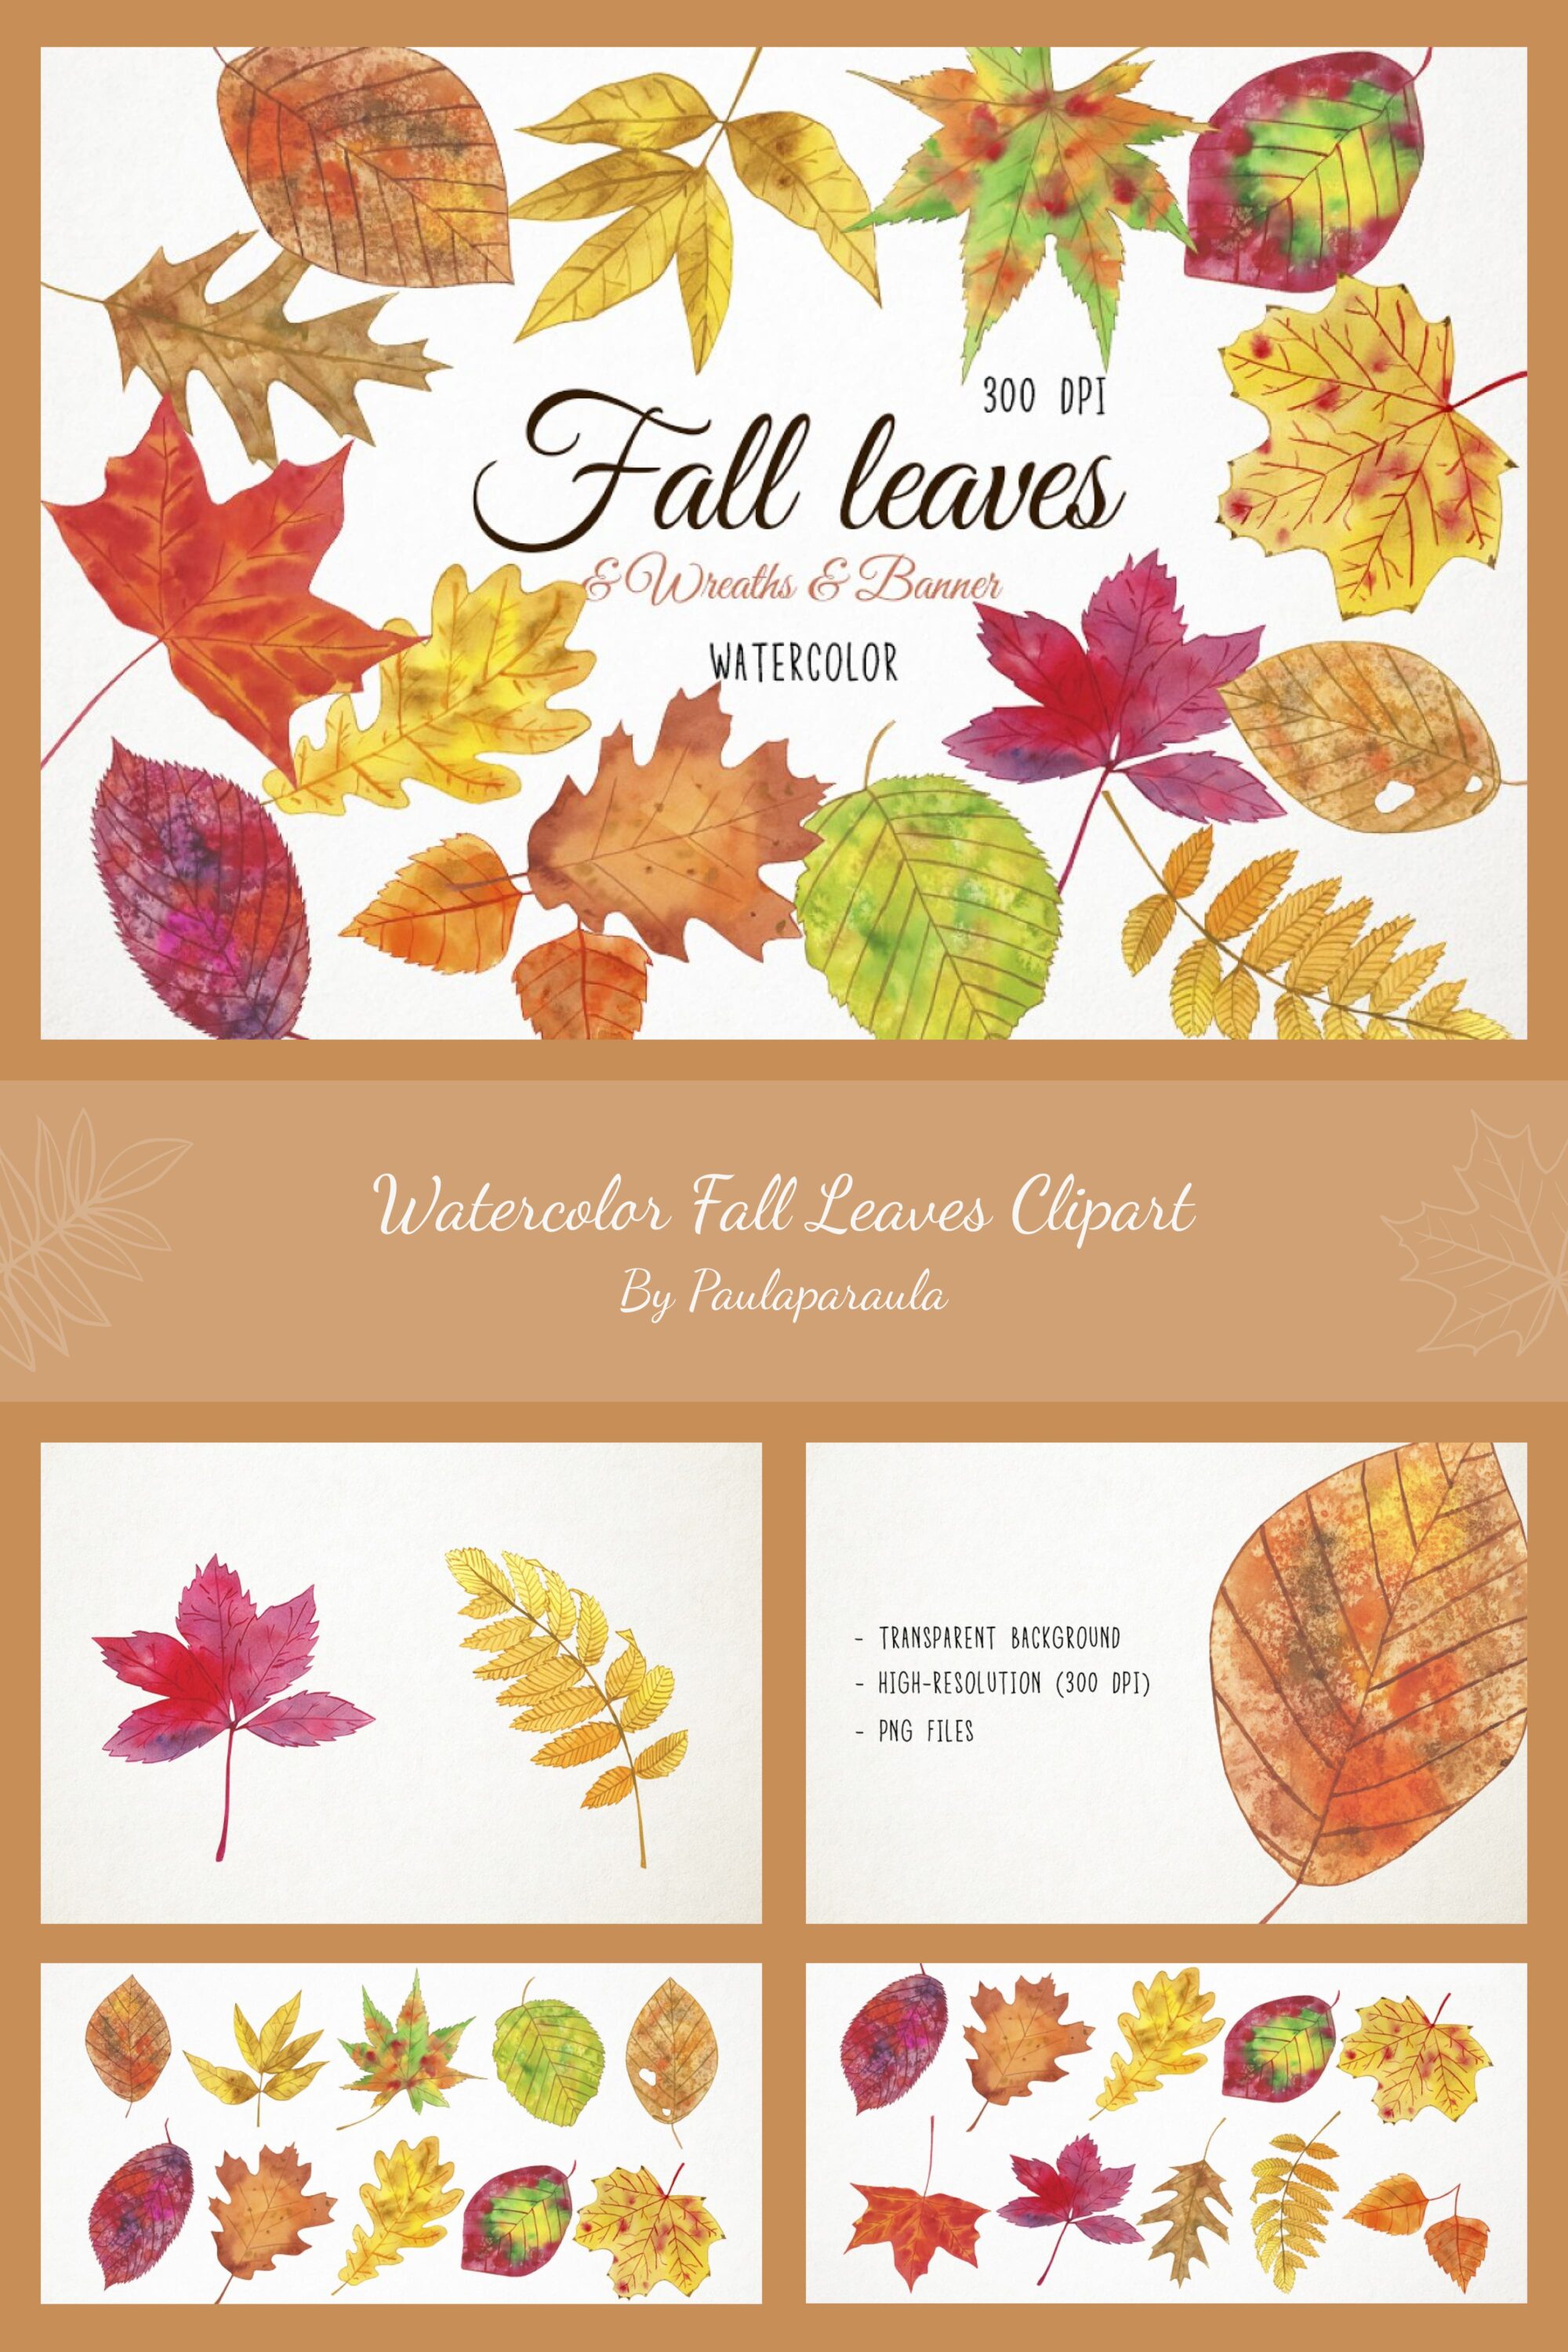 Watercolor Fall Leaves Clipart.